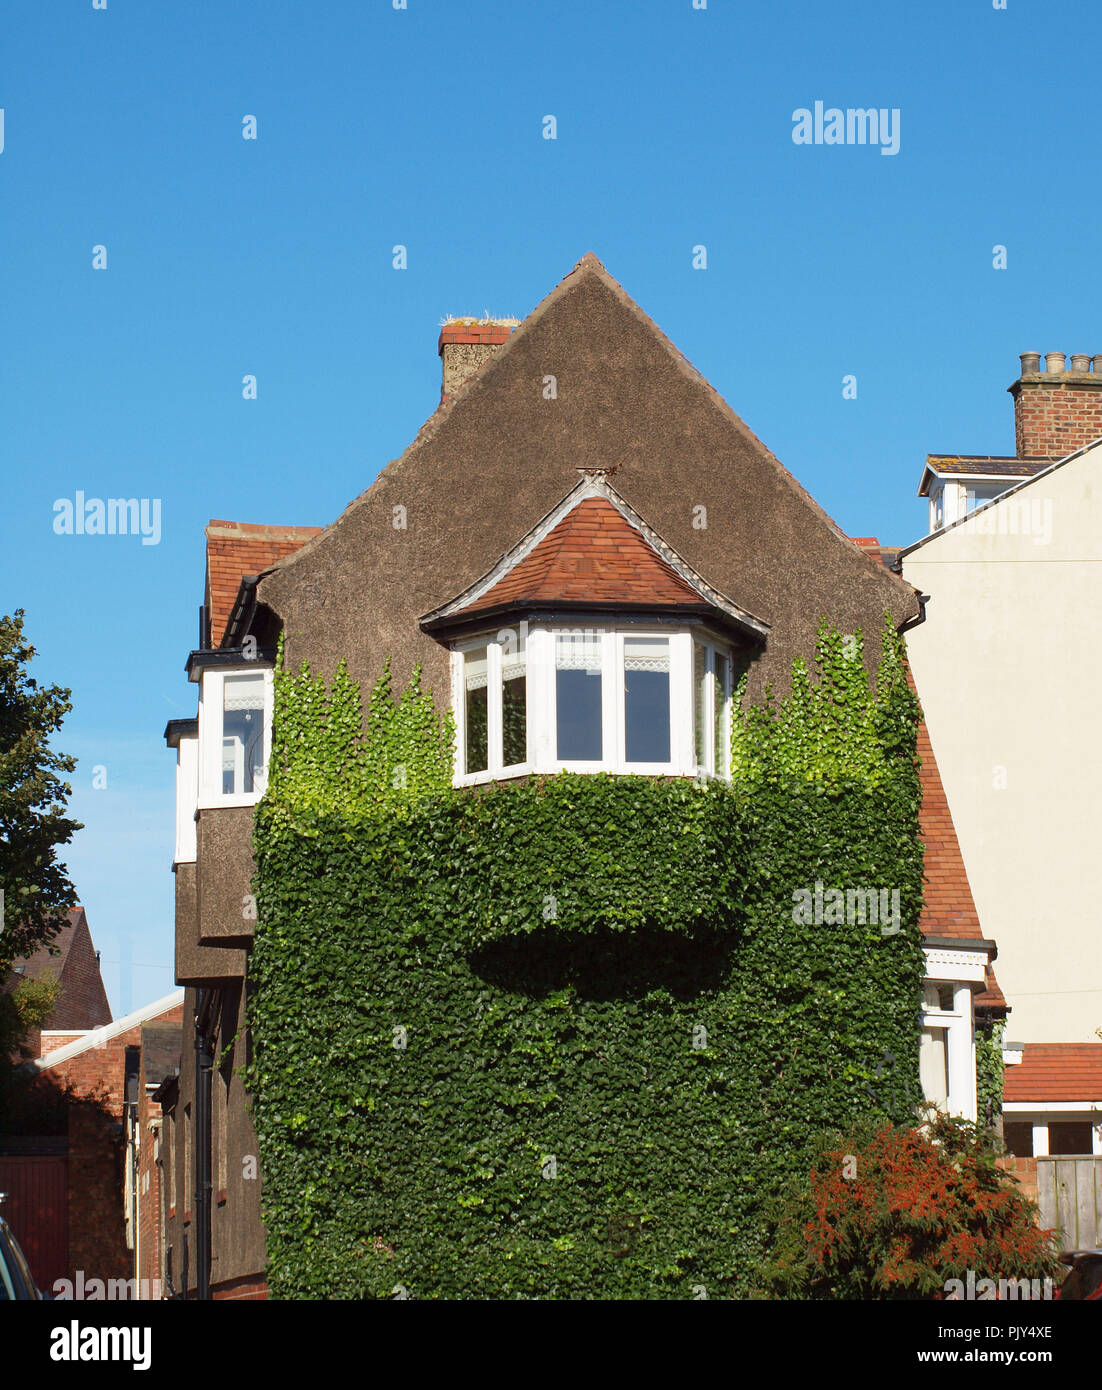 A house situated in the suburbs of Tynemouth on a sunny day with creeping ivy covering the lower part of the building Stock Photo